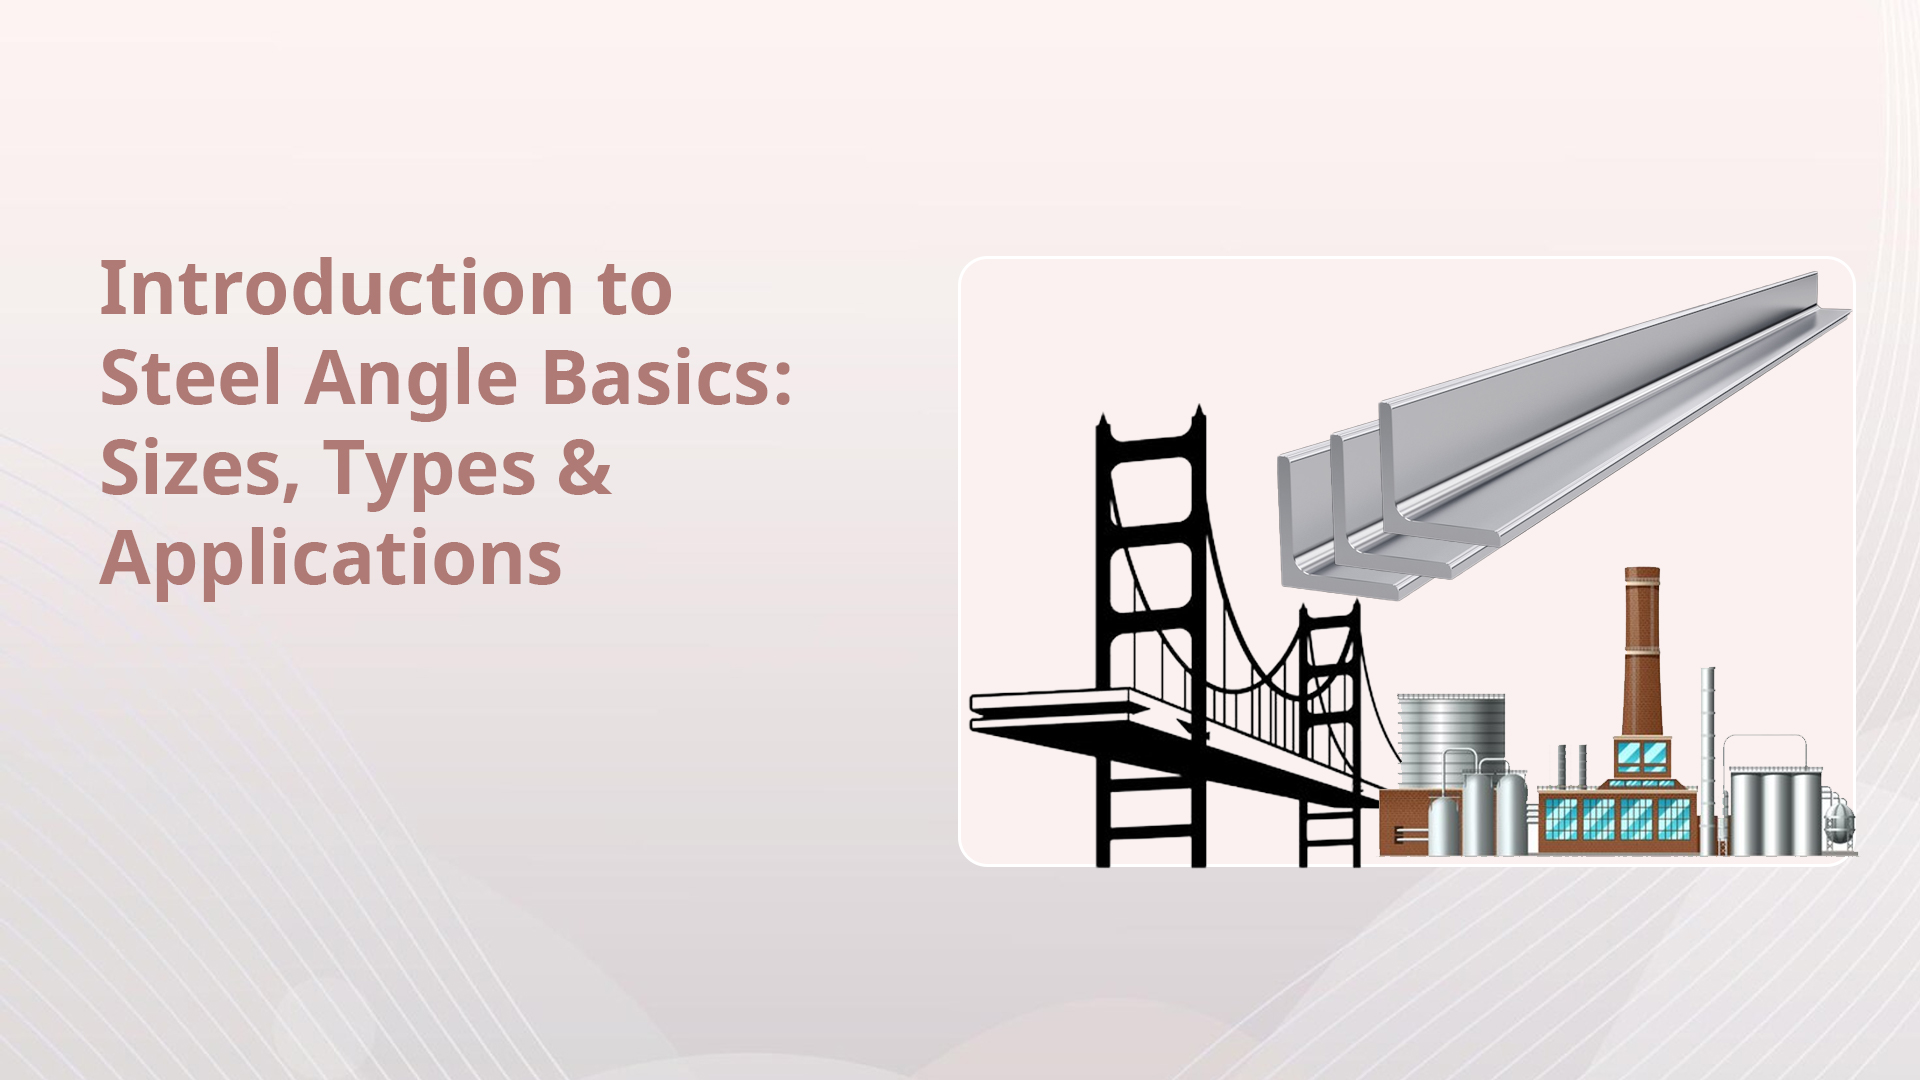 Introduction to Steel Angle Basics: Sizes, Types & Applications